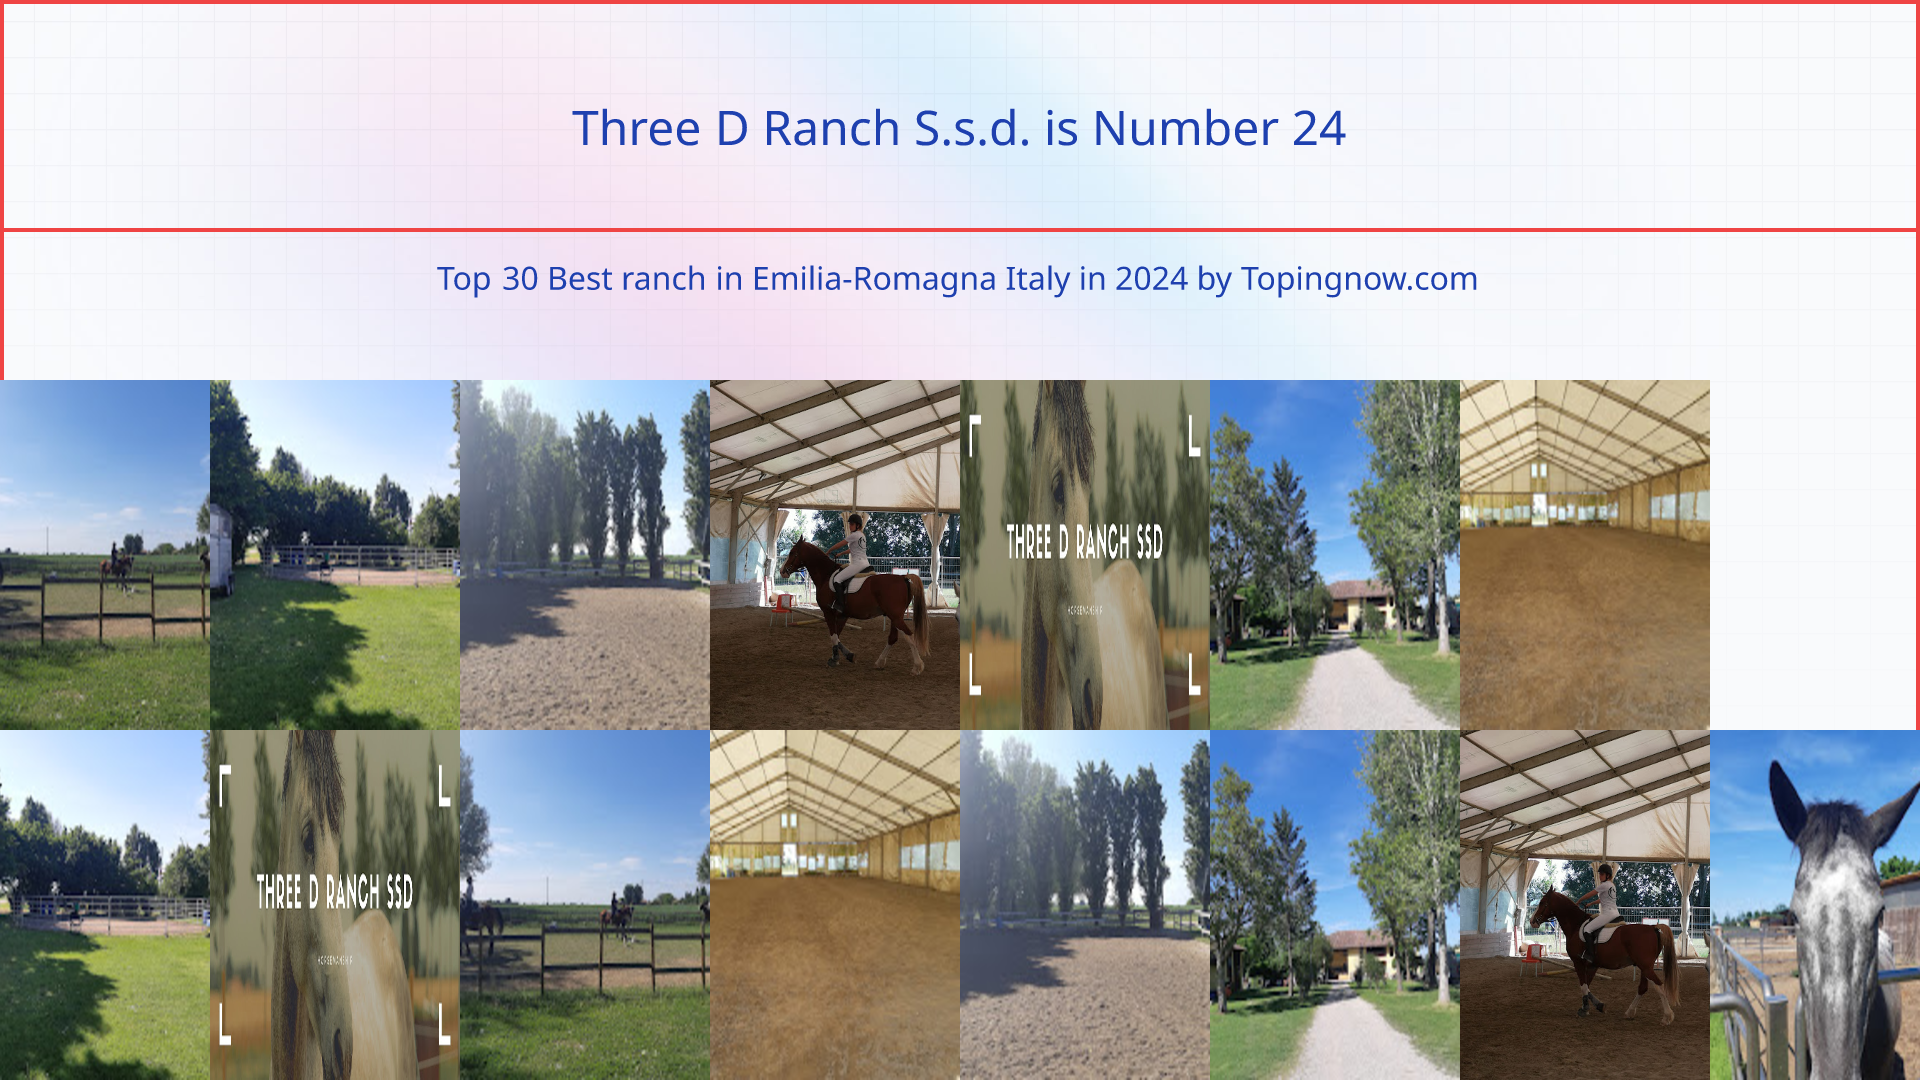 Three D Ranch S.s.d.: Top 30 Best ranch in Emilia-Romagna Italy in 2024